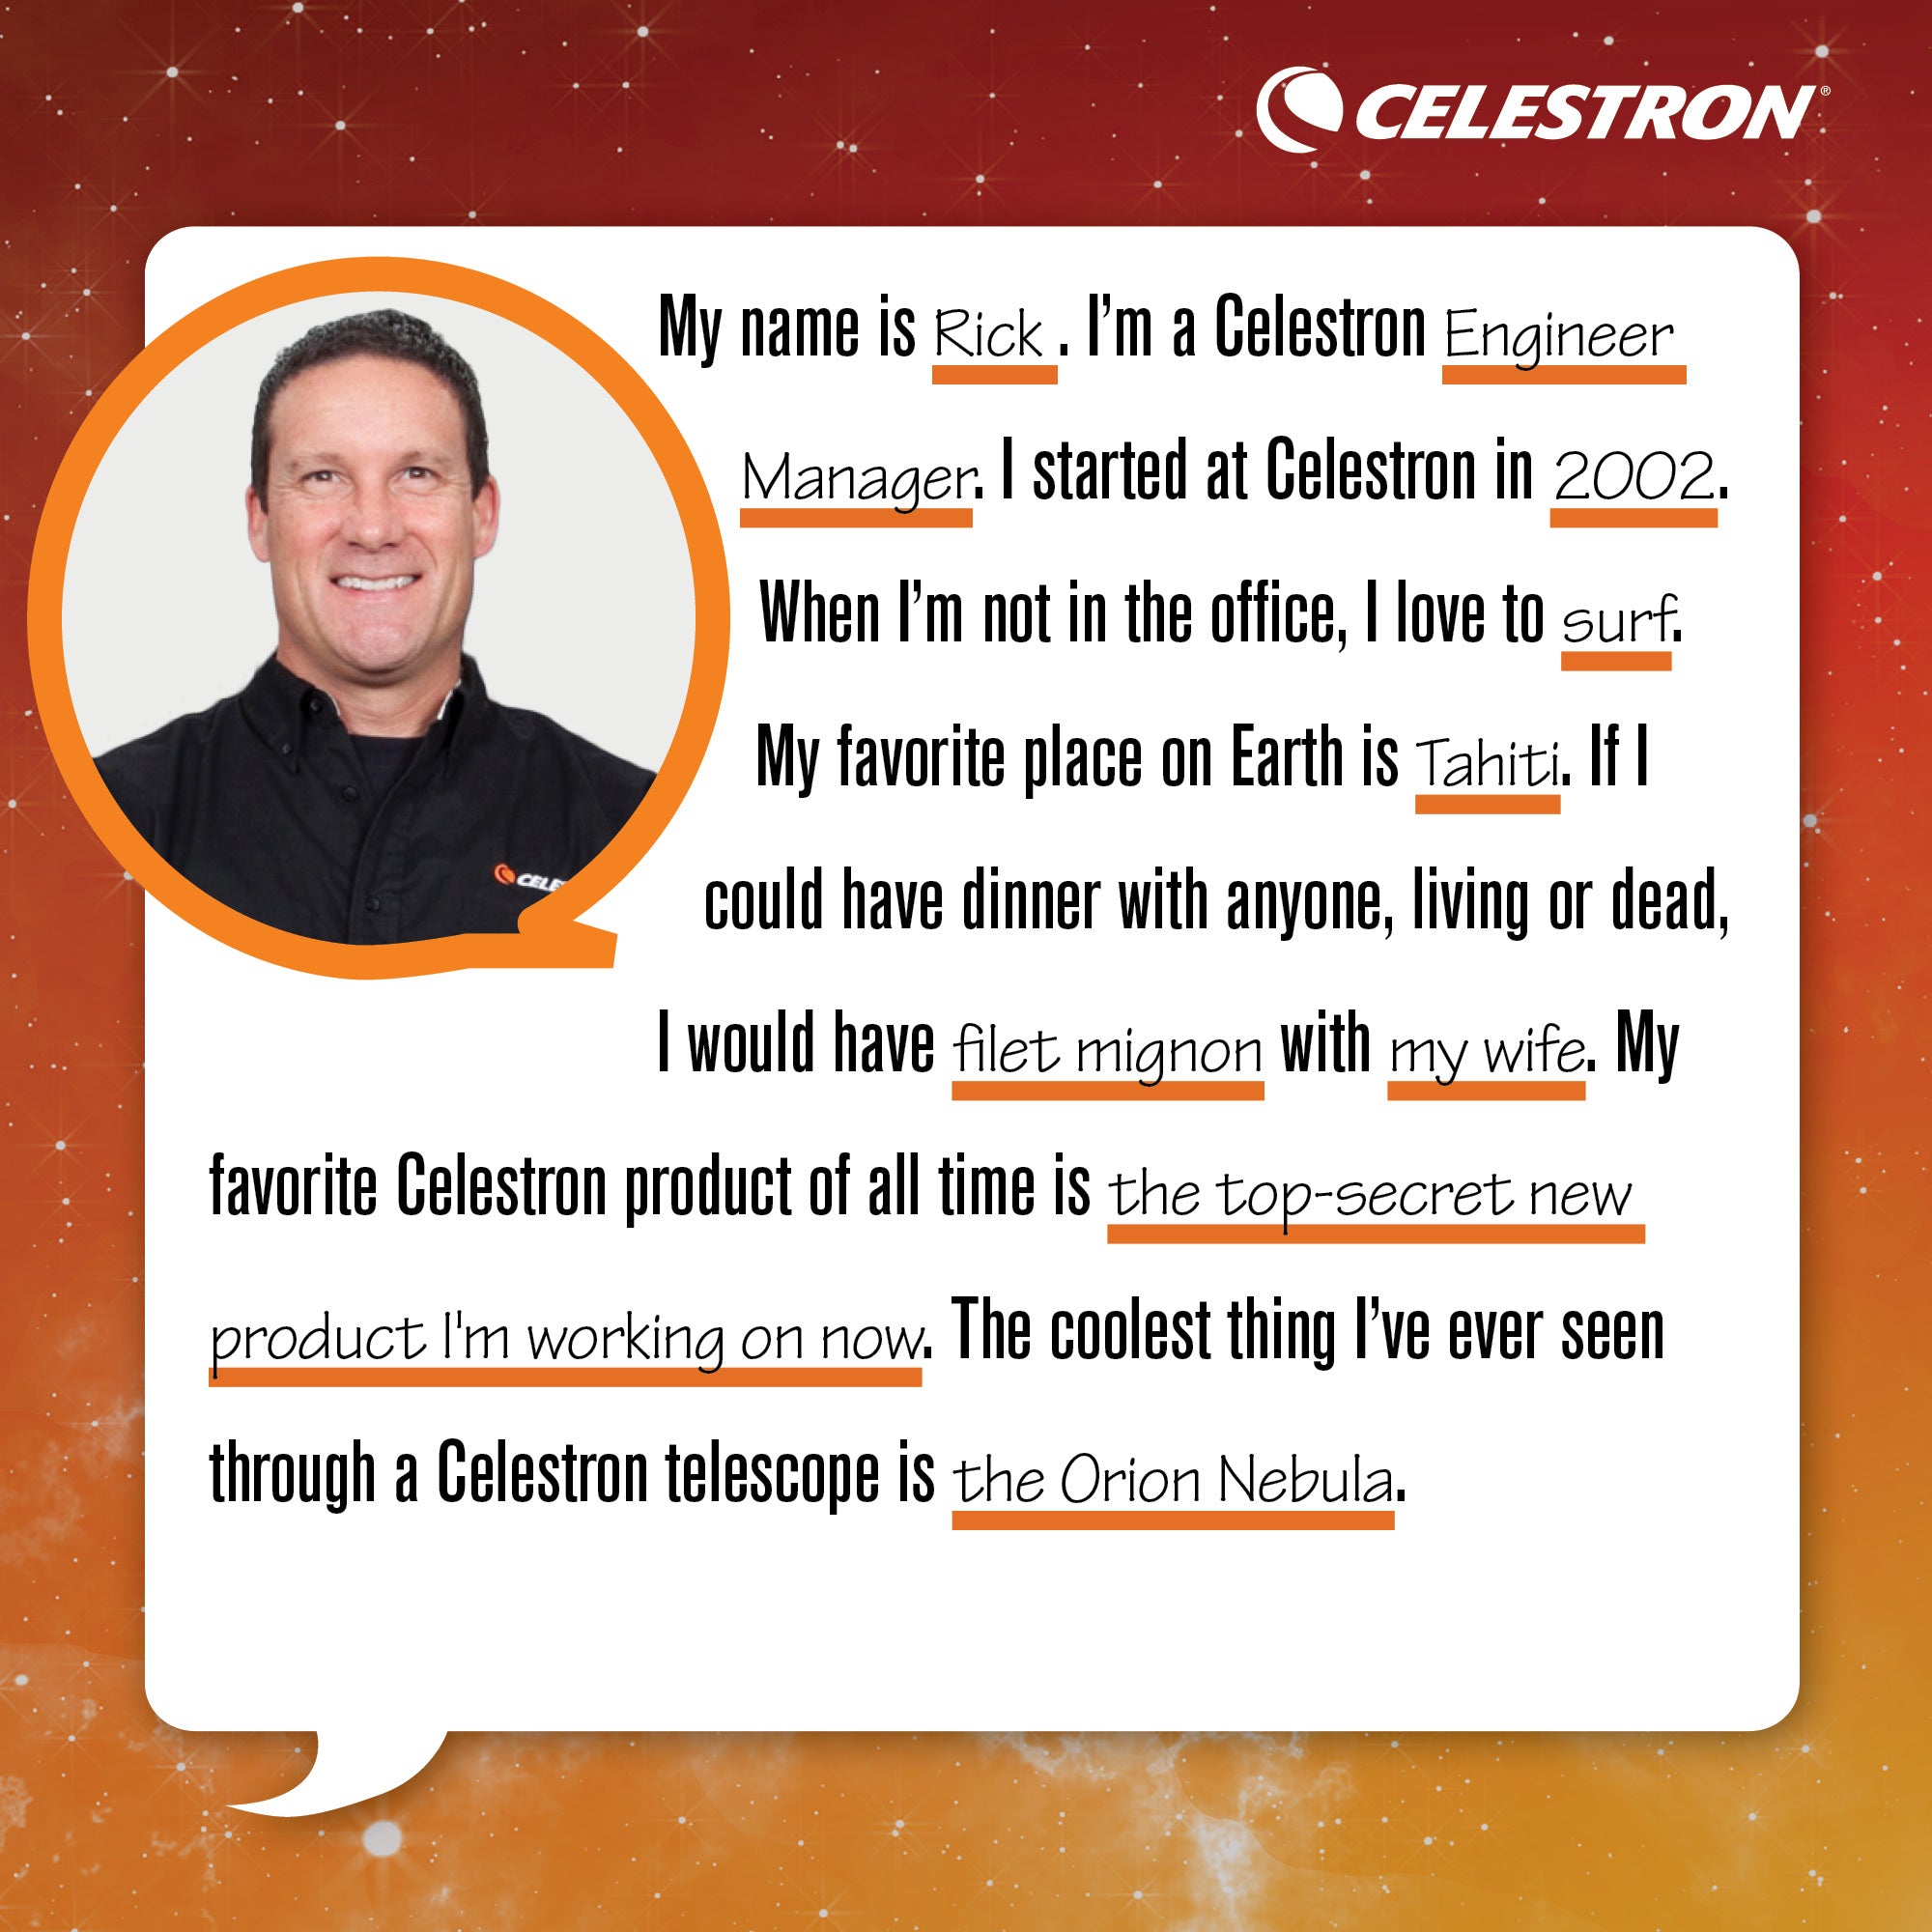 My name is Rick. I am a Celestron Engineer Manager. I started at Celestron in 2002. When I'm not in the office, I love to surf. My favorite place on Earth is Tahiti. If I could have dinner with anyone, living or dead, I would have filet mignon with my wife. My favorite Celestron product of all time is the top-secret new product I'm working on now. The coolest thing I've ever seen through a telescope is the Orion Nebula.